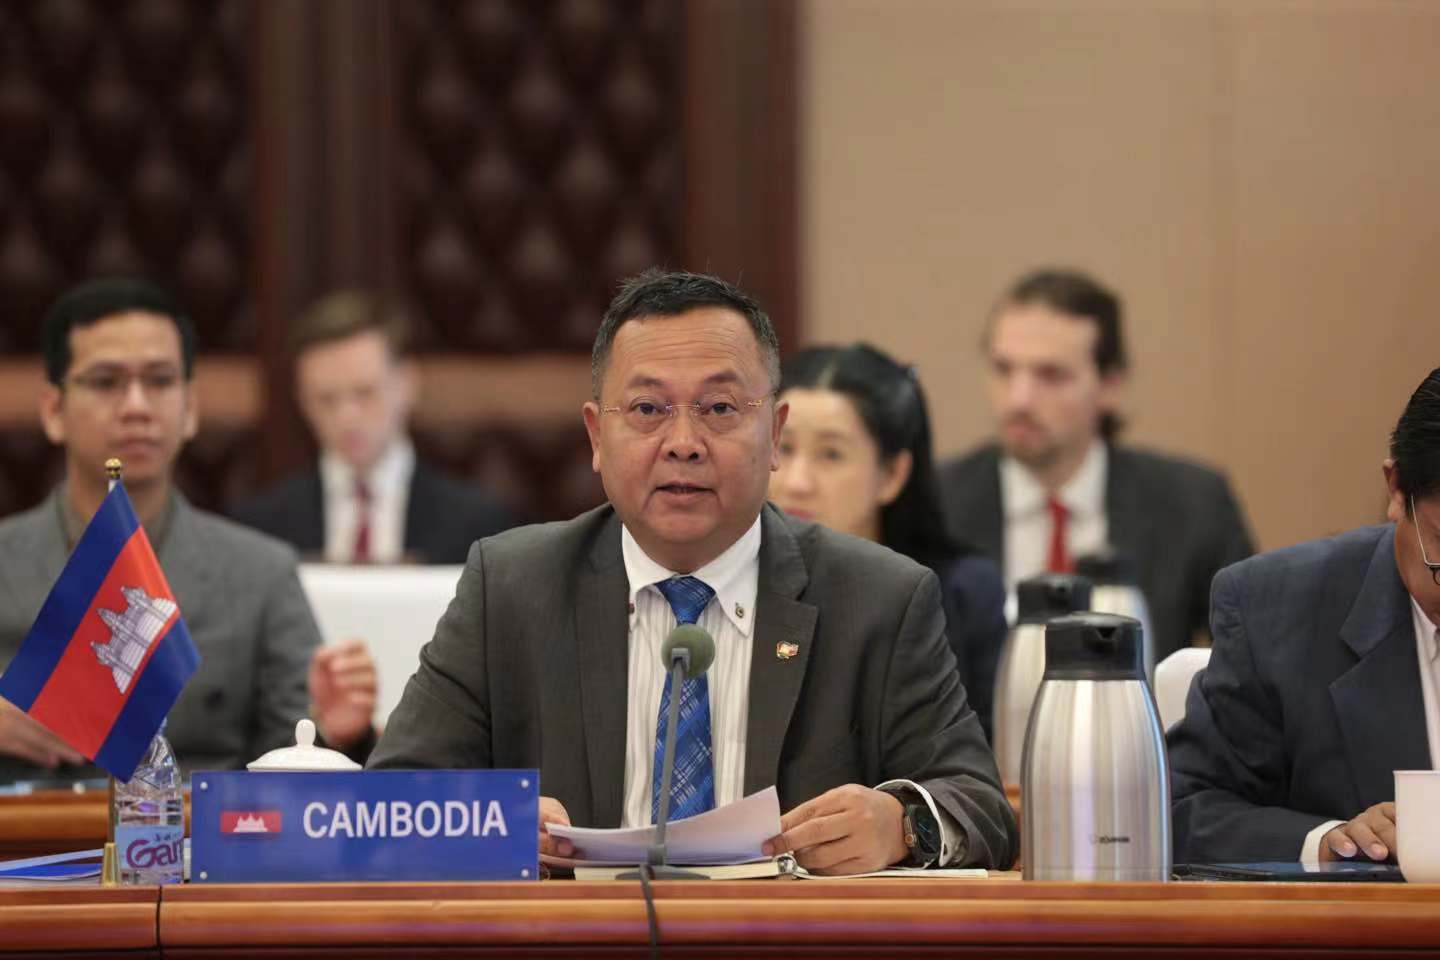 Secretary General of the National Authority for Combating Drugs of Cambodia H.E. Pol. Gen. Meas Vyrith discussing cooperation and achievements in addressing the regional drug situation under the previous SAP of the Mekong MOU